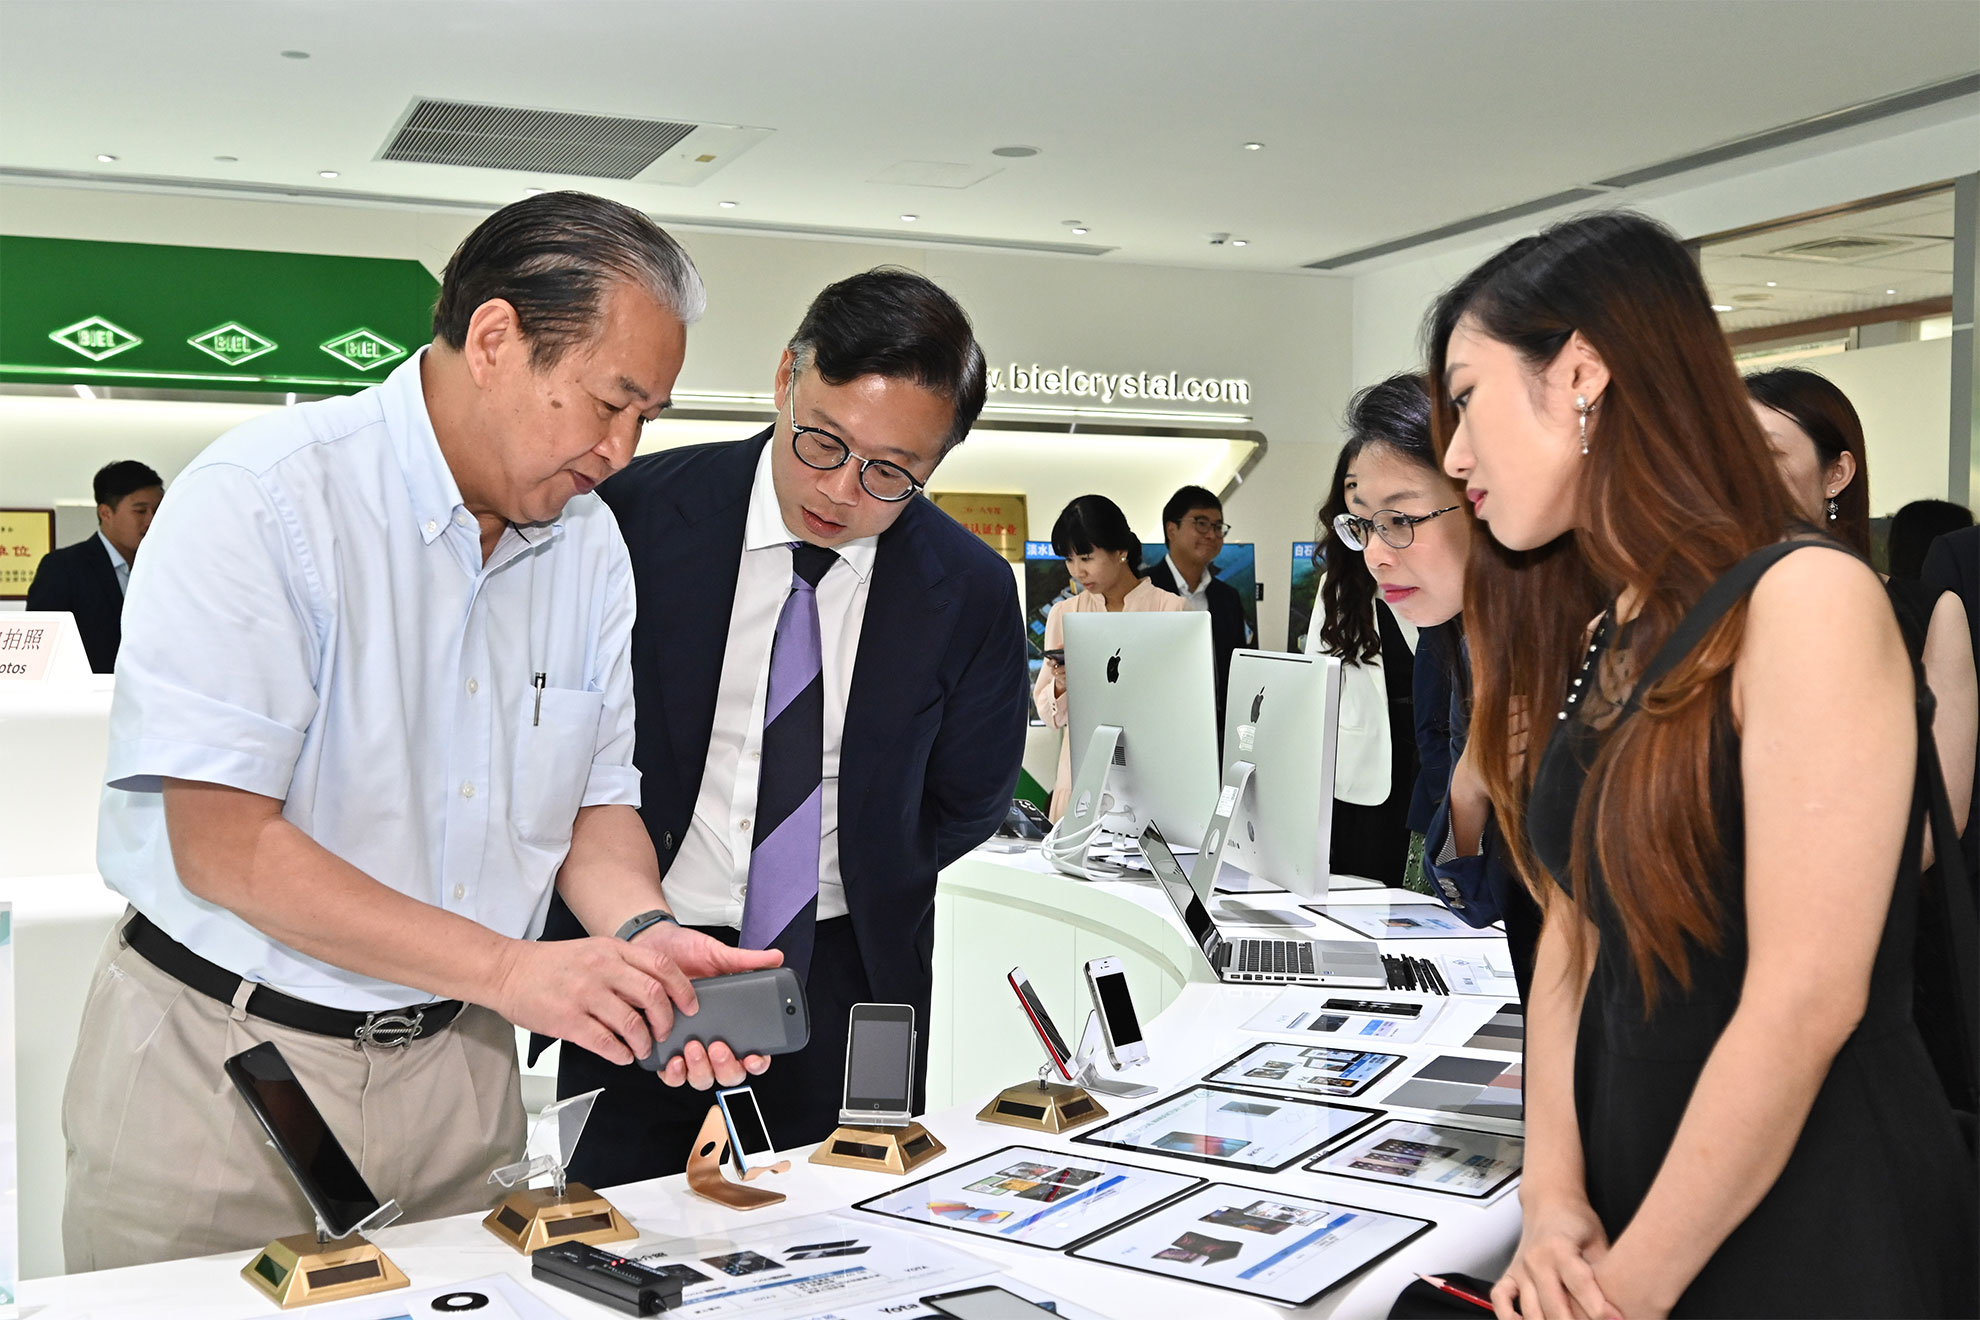 The Deputy Secretary for Justice, Mr Cheung Kwok-kwan, led a delegation comprising young lawyers and law students to visit Biel Crystal's Science and Technology Park in Huizhou today (September 7). Photo shows Mr Cheung (second left) and members of the delegation learning about the challenges of research and development of touch screen technology.